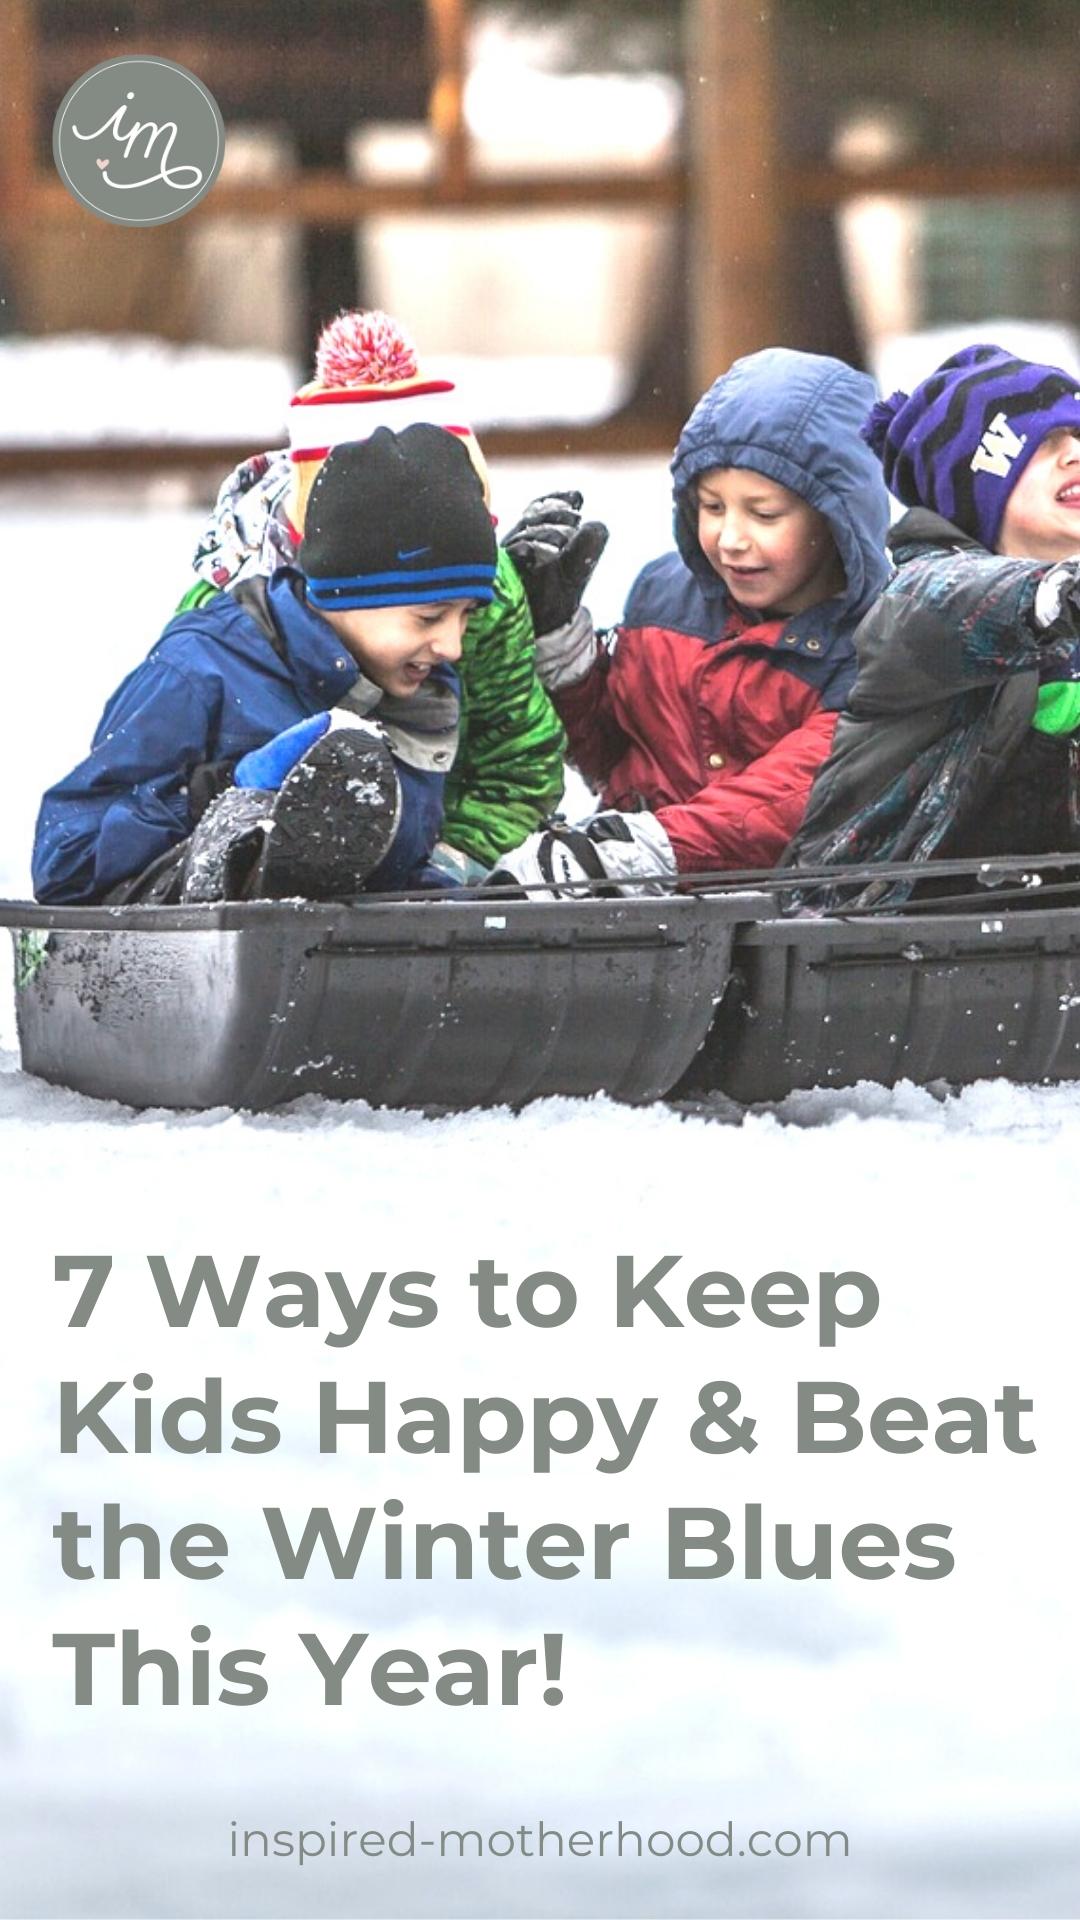 Winter doesn't have to be boring! Here are 7 ways to keep your kids happy this winter and beat the winter blues as a stay at home mom.